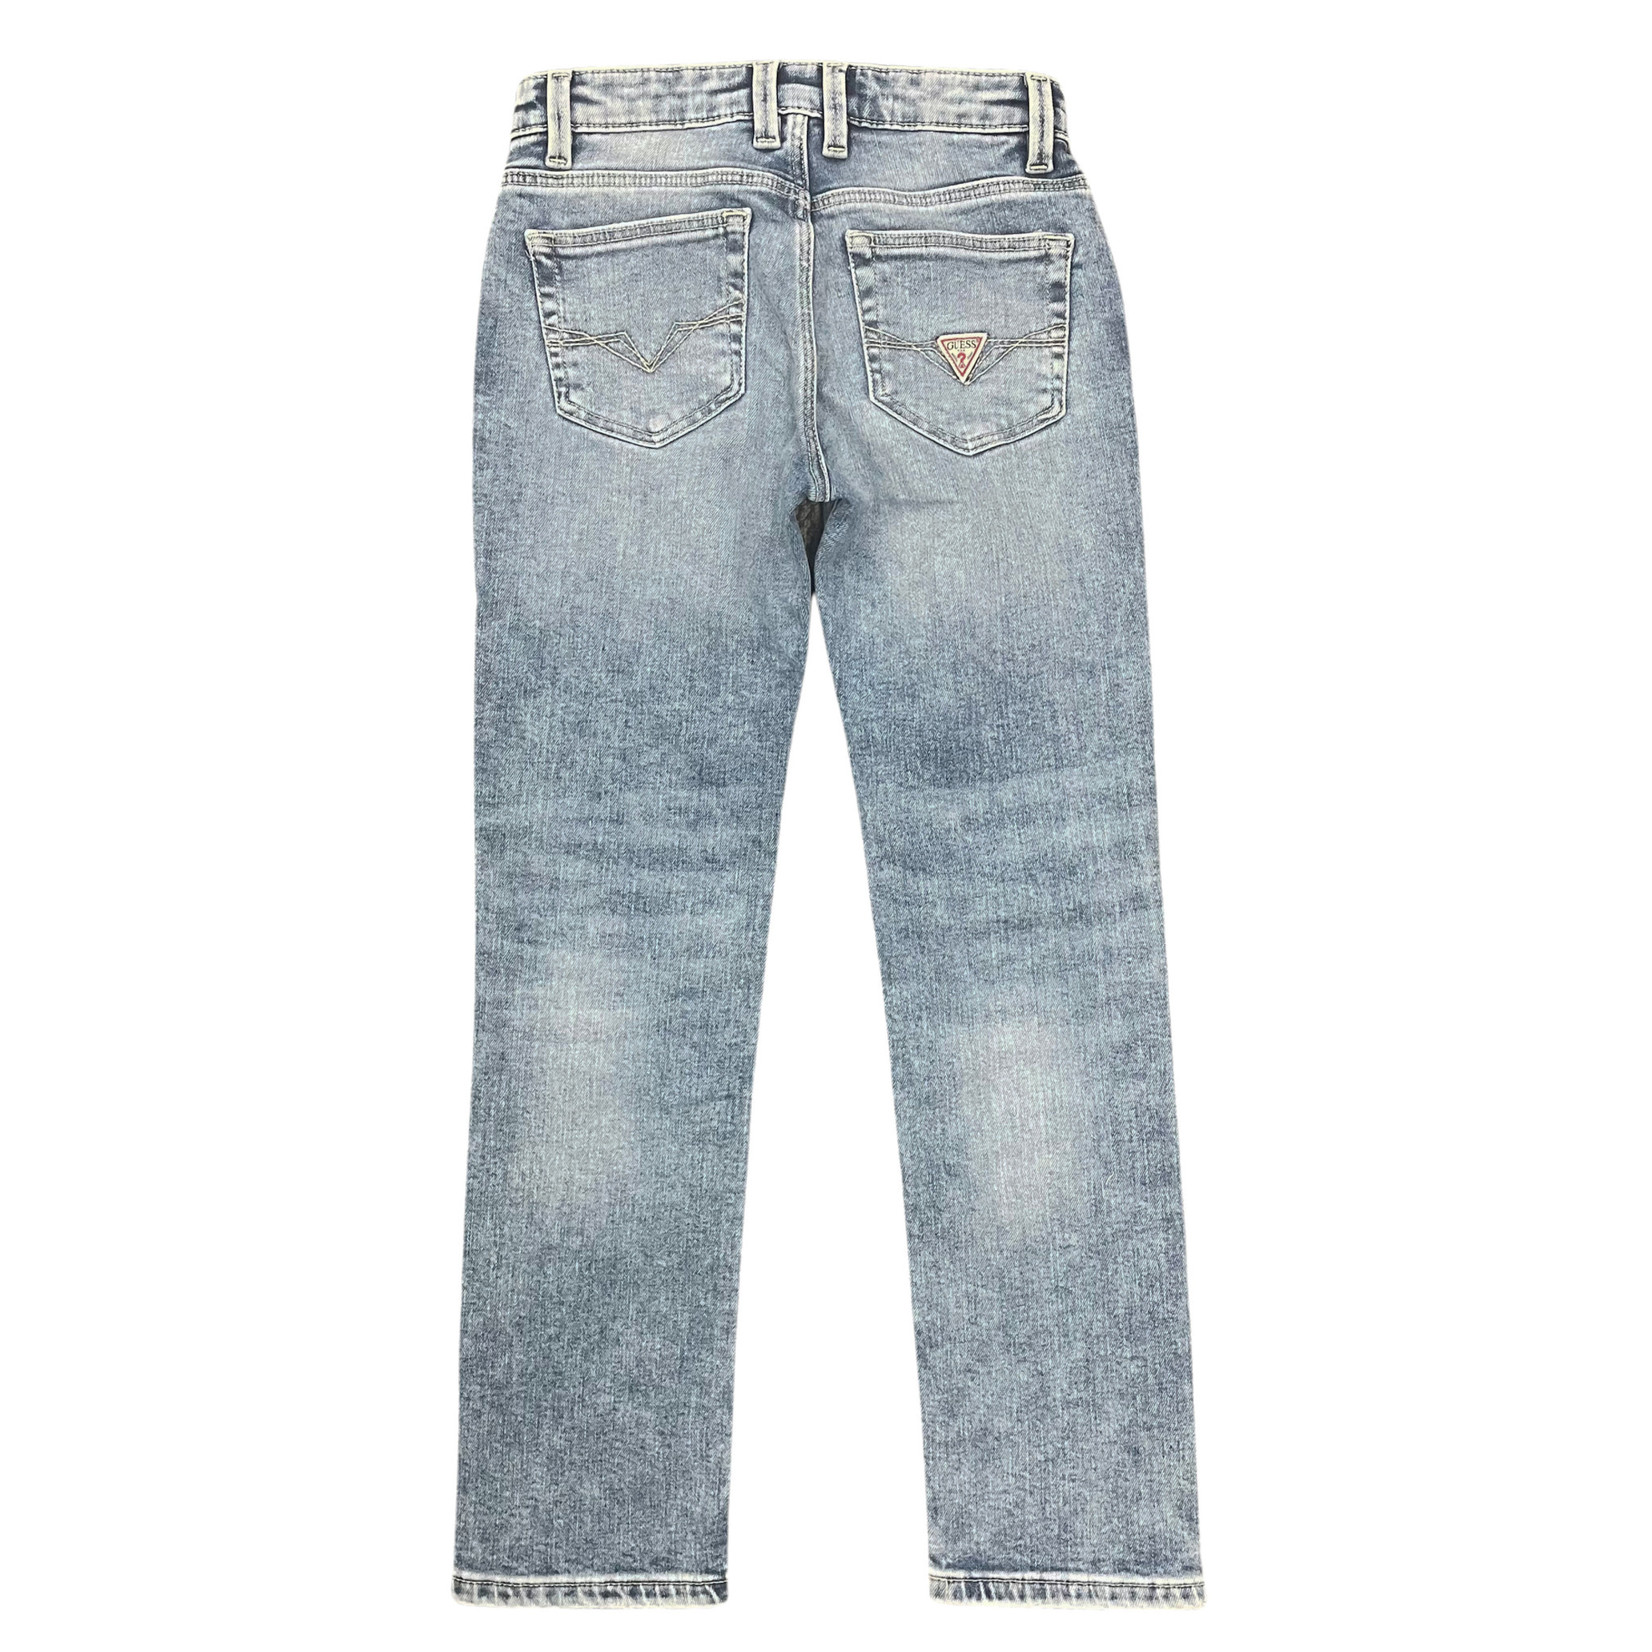 Guess Guess - Boys Slim Fit Jeans